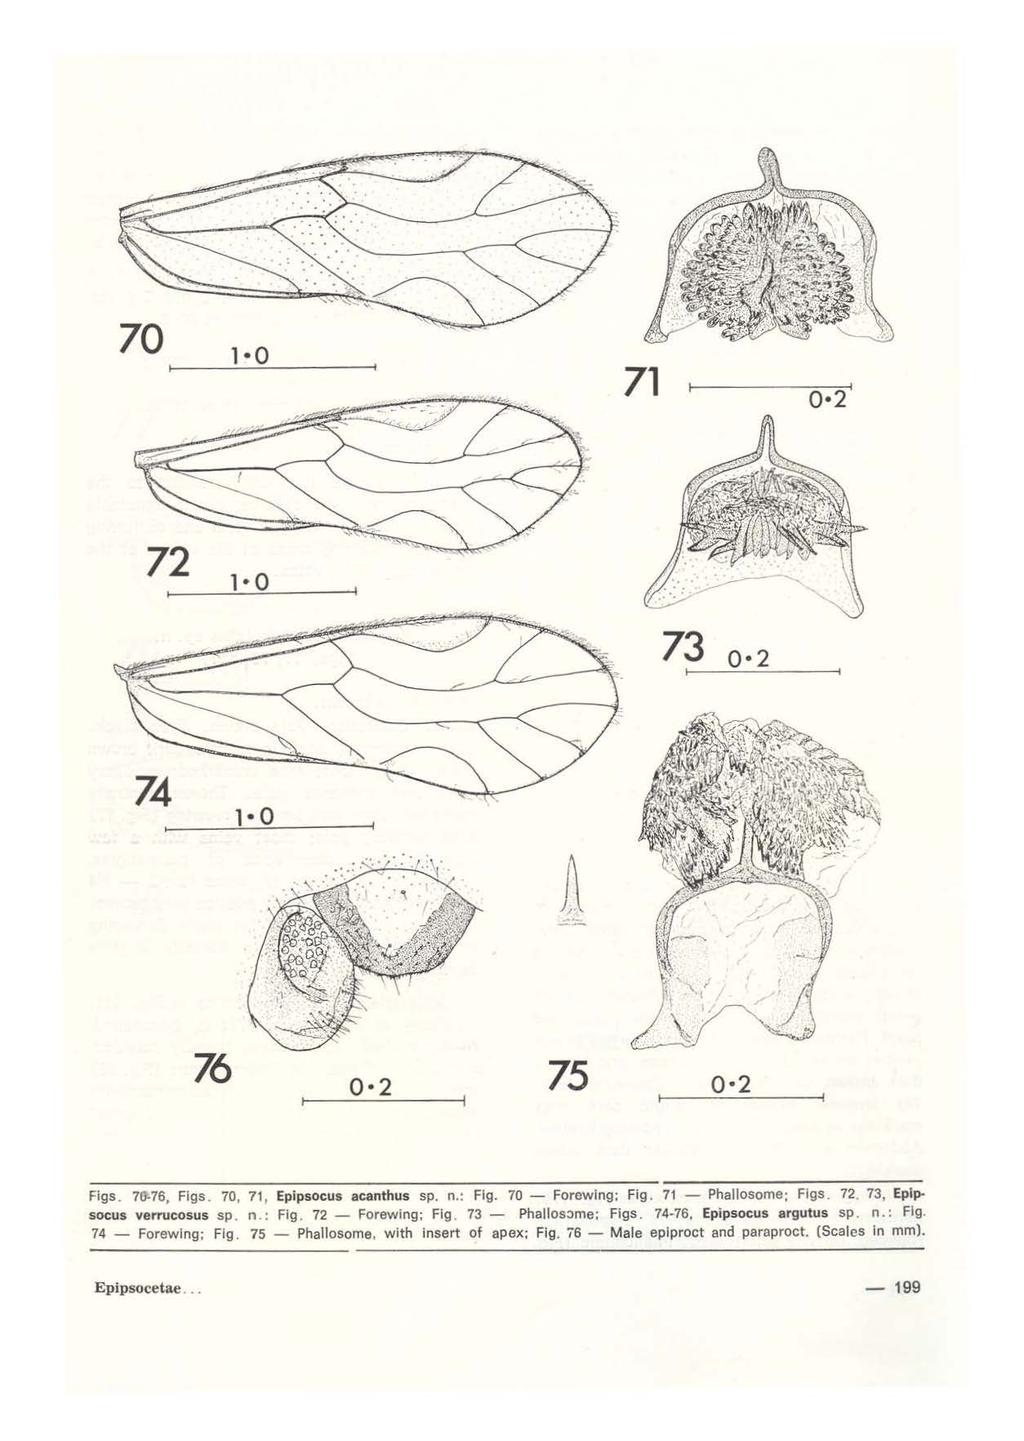 70 1 0 71 0 2 72 73 0 2 74 1 o 76 0 2 75 0 2 Flgs. 7&-76, Figs. 70, 71, Epipsocus acanthus sp. n. : Flg. 70- Forewing: Fig. 71 - Phallosome; Figs. 72. 73, Epipsocus verrucosus sp. n.: Flg. 72- Forewing; Fig.